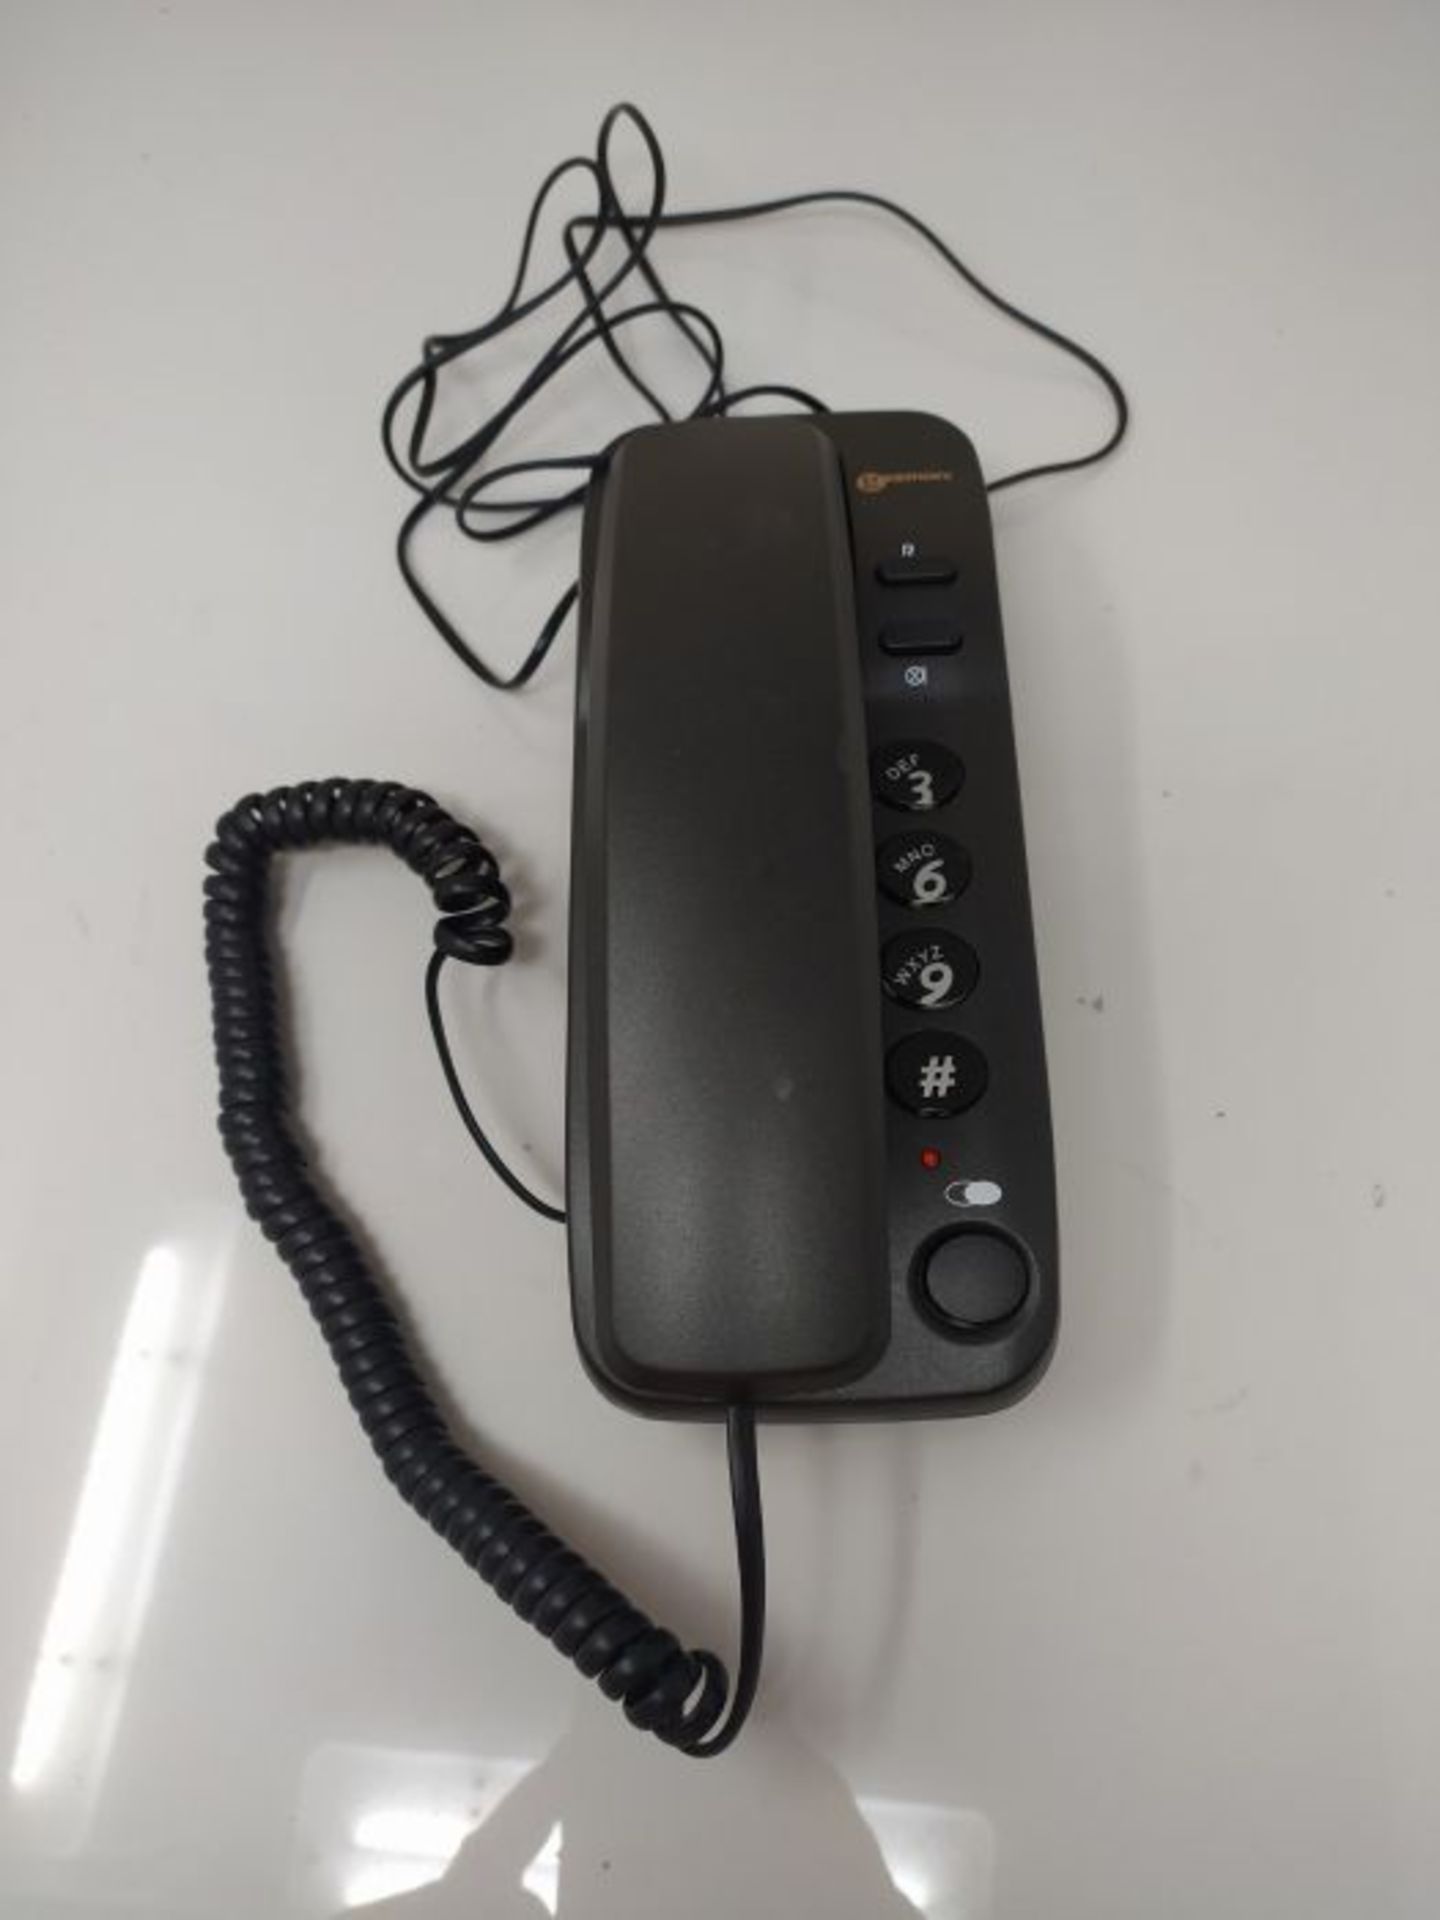 Geemarc Marbella - Gondola Style Corded Analogue Telephone with Large Buttons, Mute Fu - Image 2 of 2